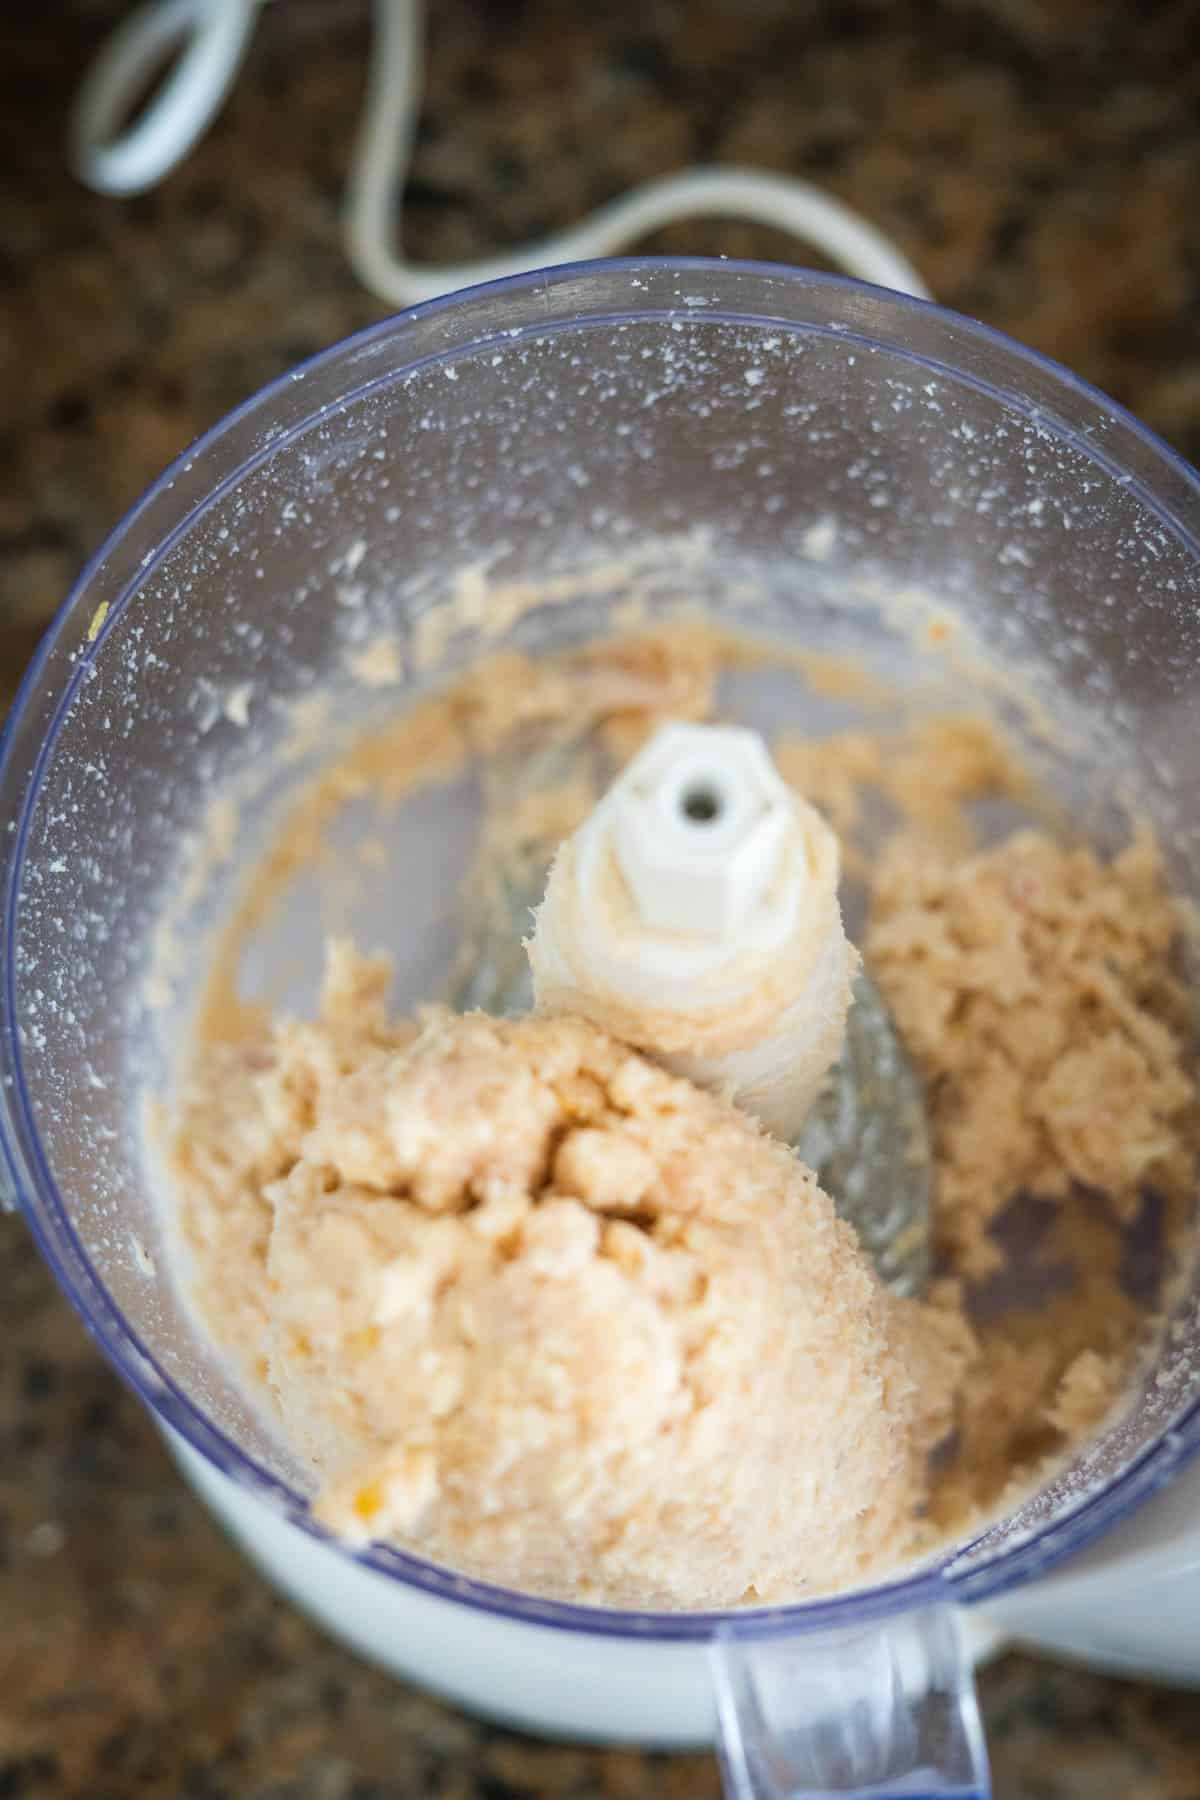 Top view of a food processor containing freshly made chicken piccata meatballs dough with a visible blade attachment, placed on a kitchen counter.